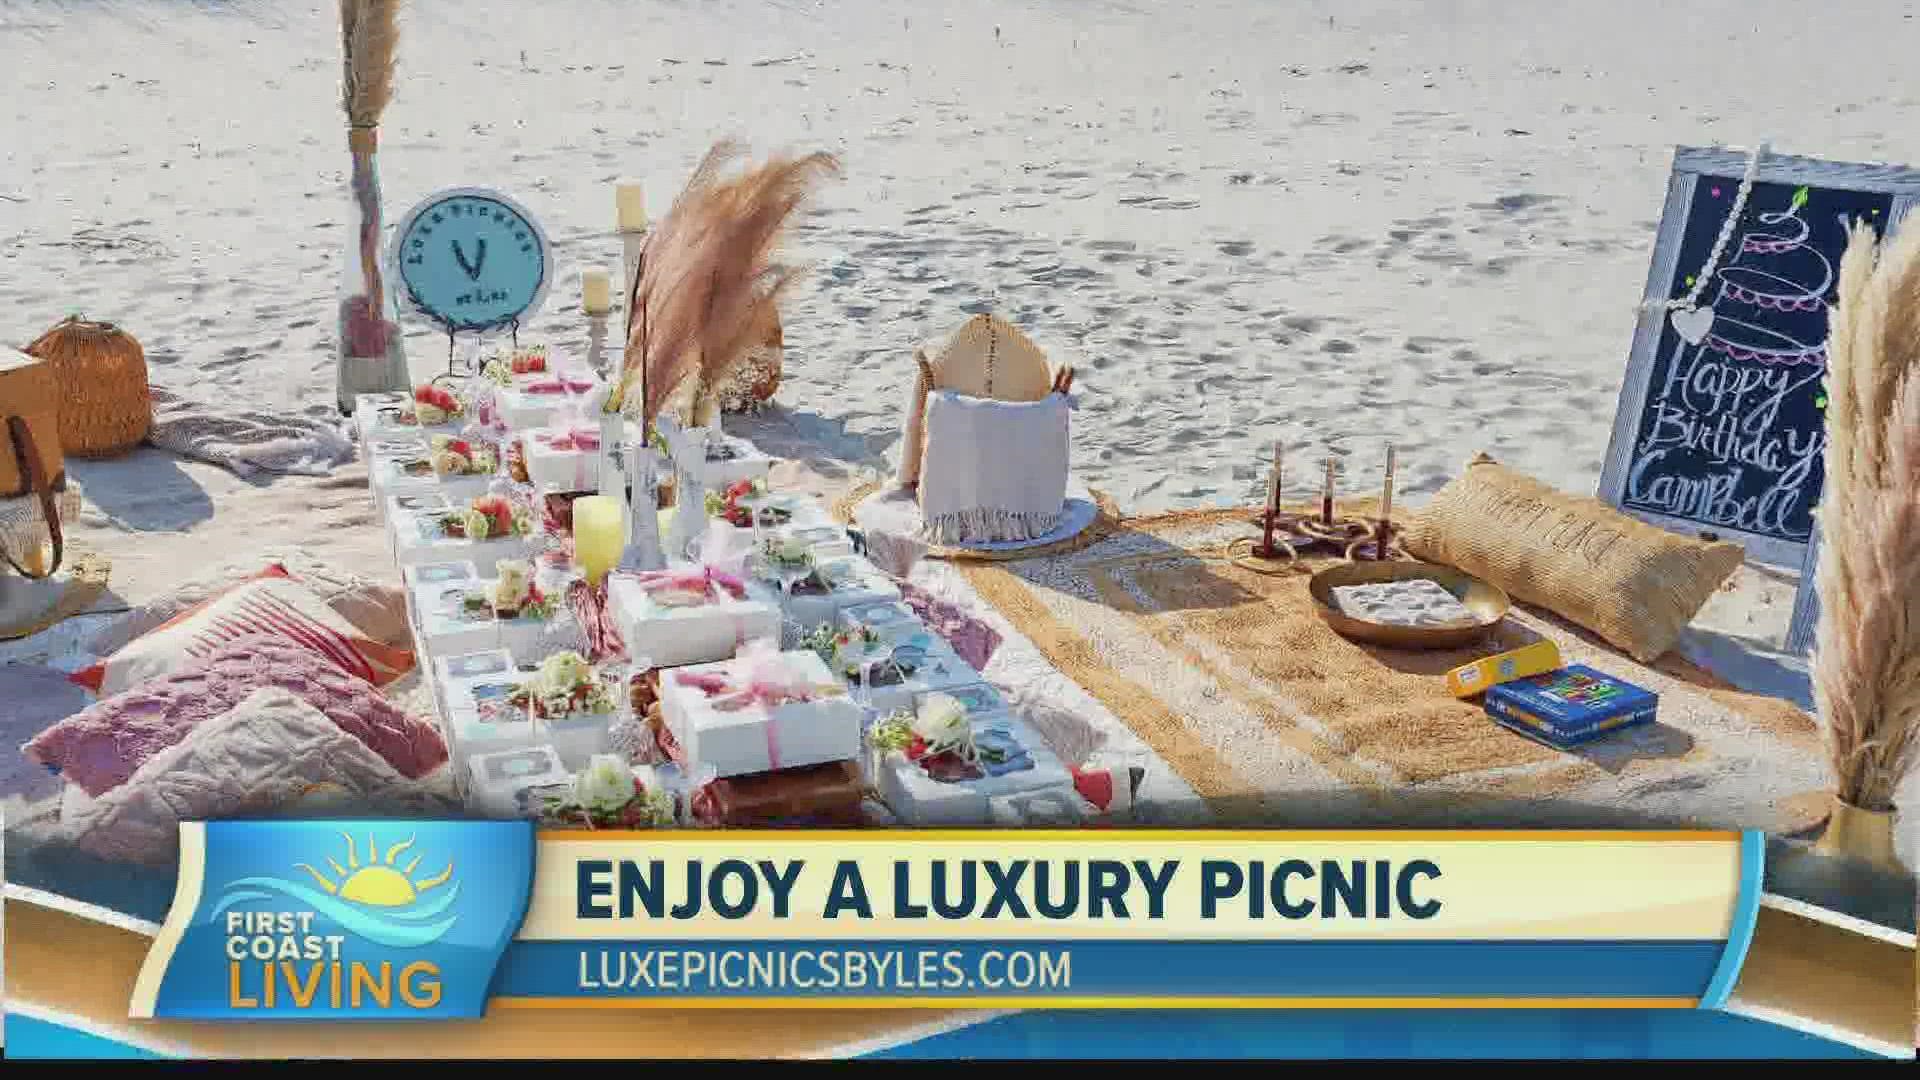 The owner, Leslie Diaz shows us an example of one of her luxe picnic displays.